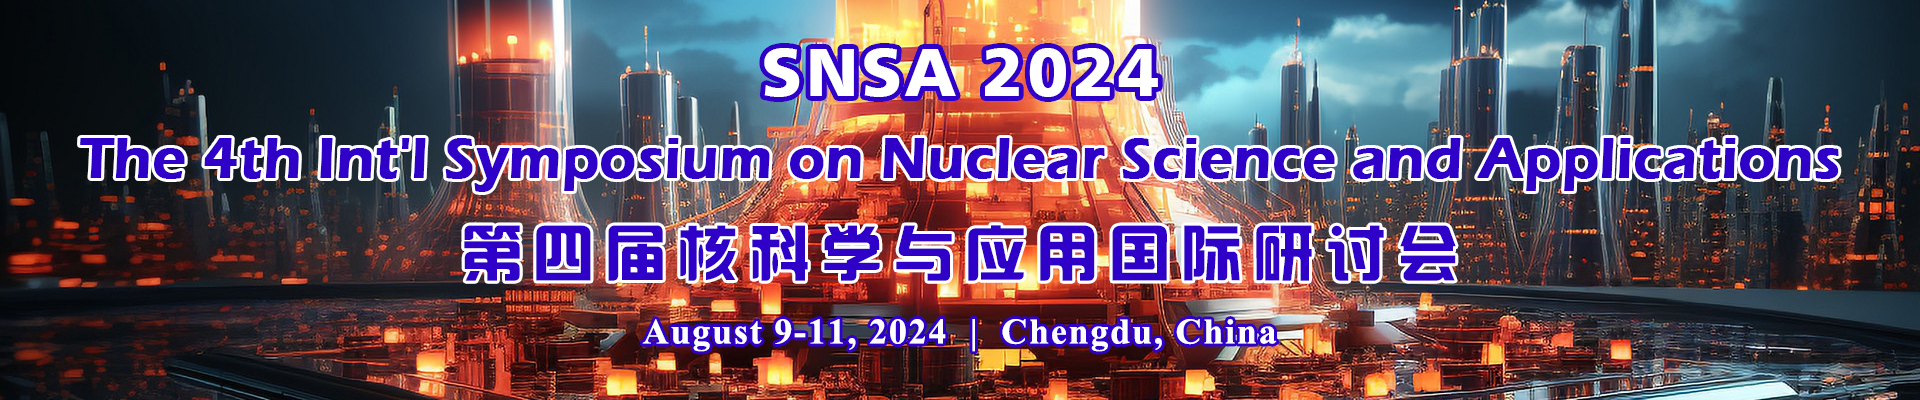 The 4th Int'l Symposium on Nuclear Science and Applications (SNSA 2024) 